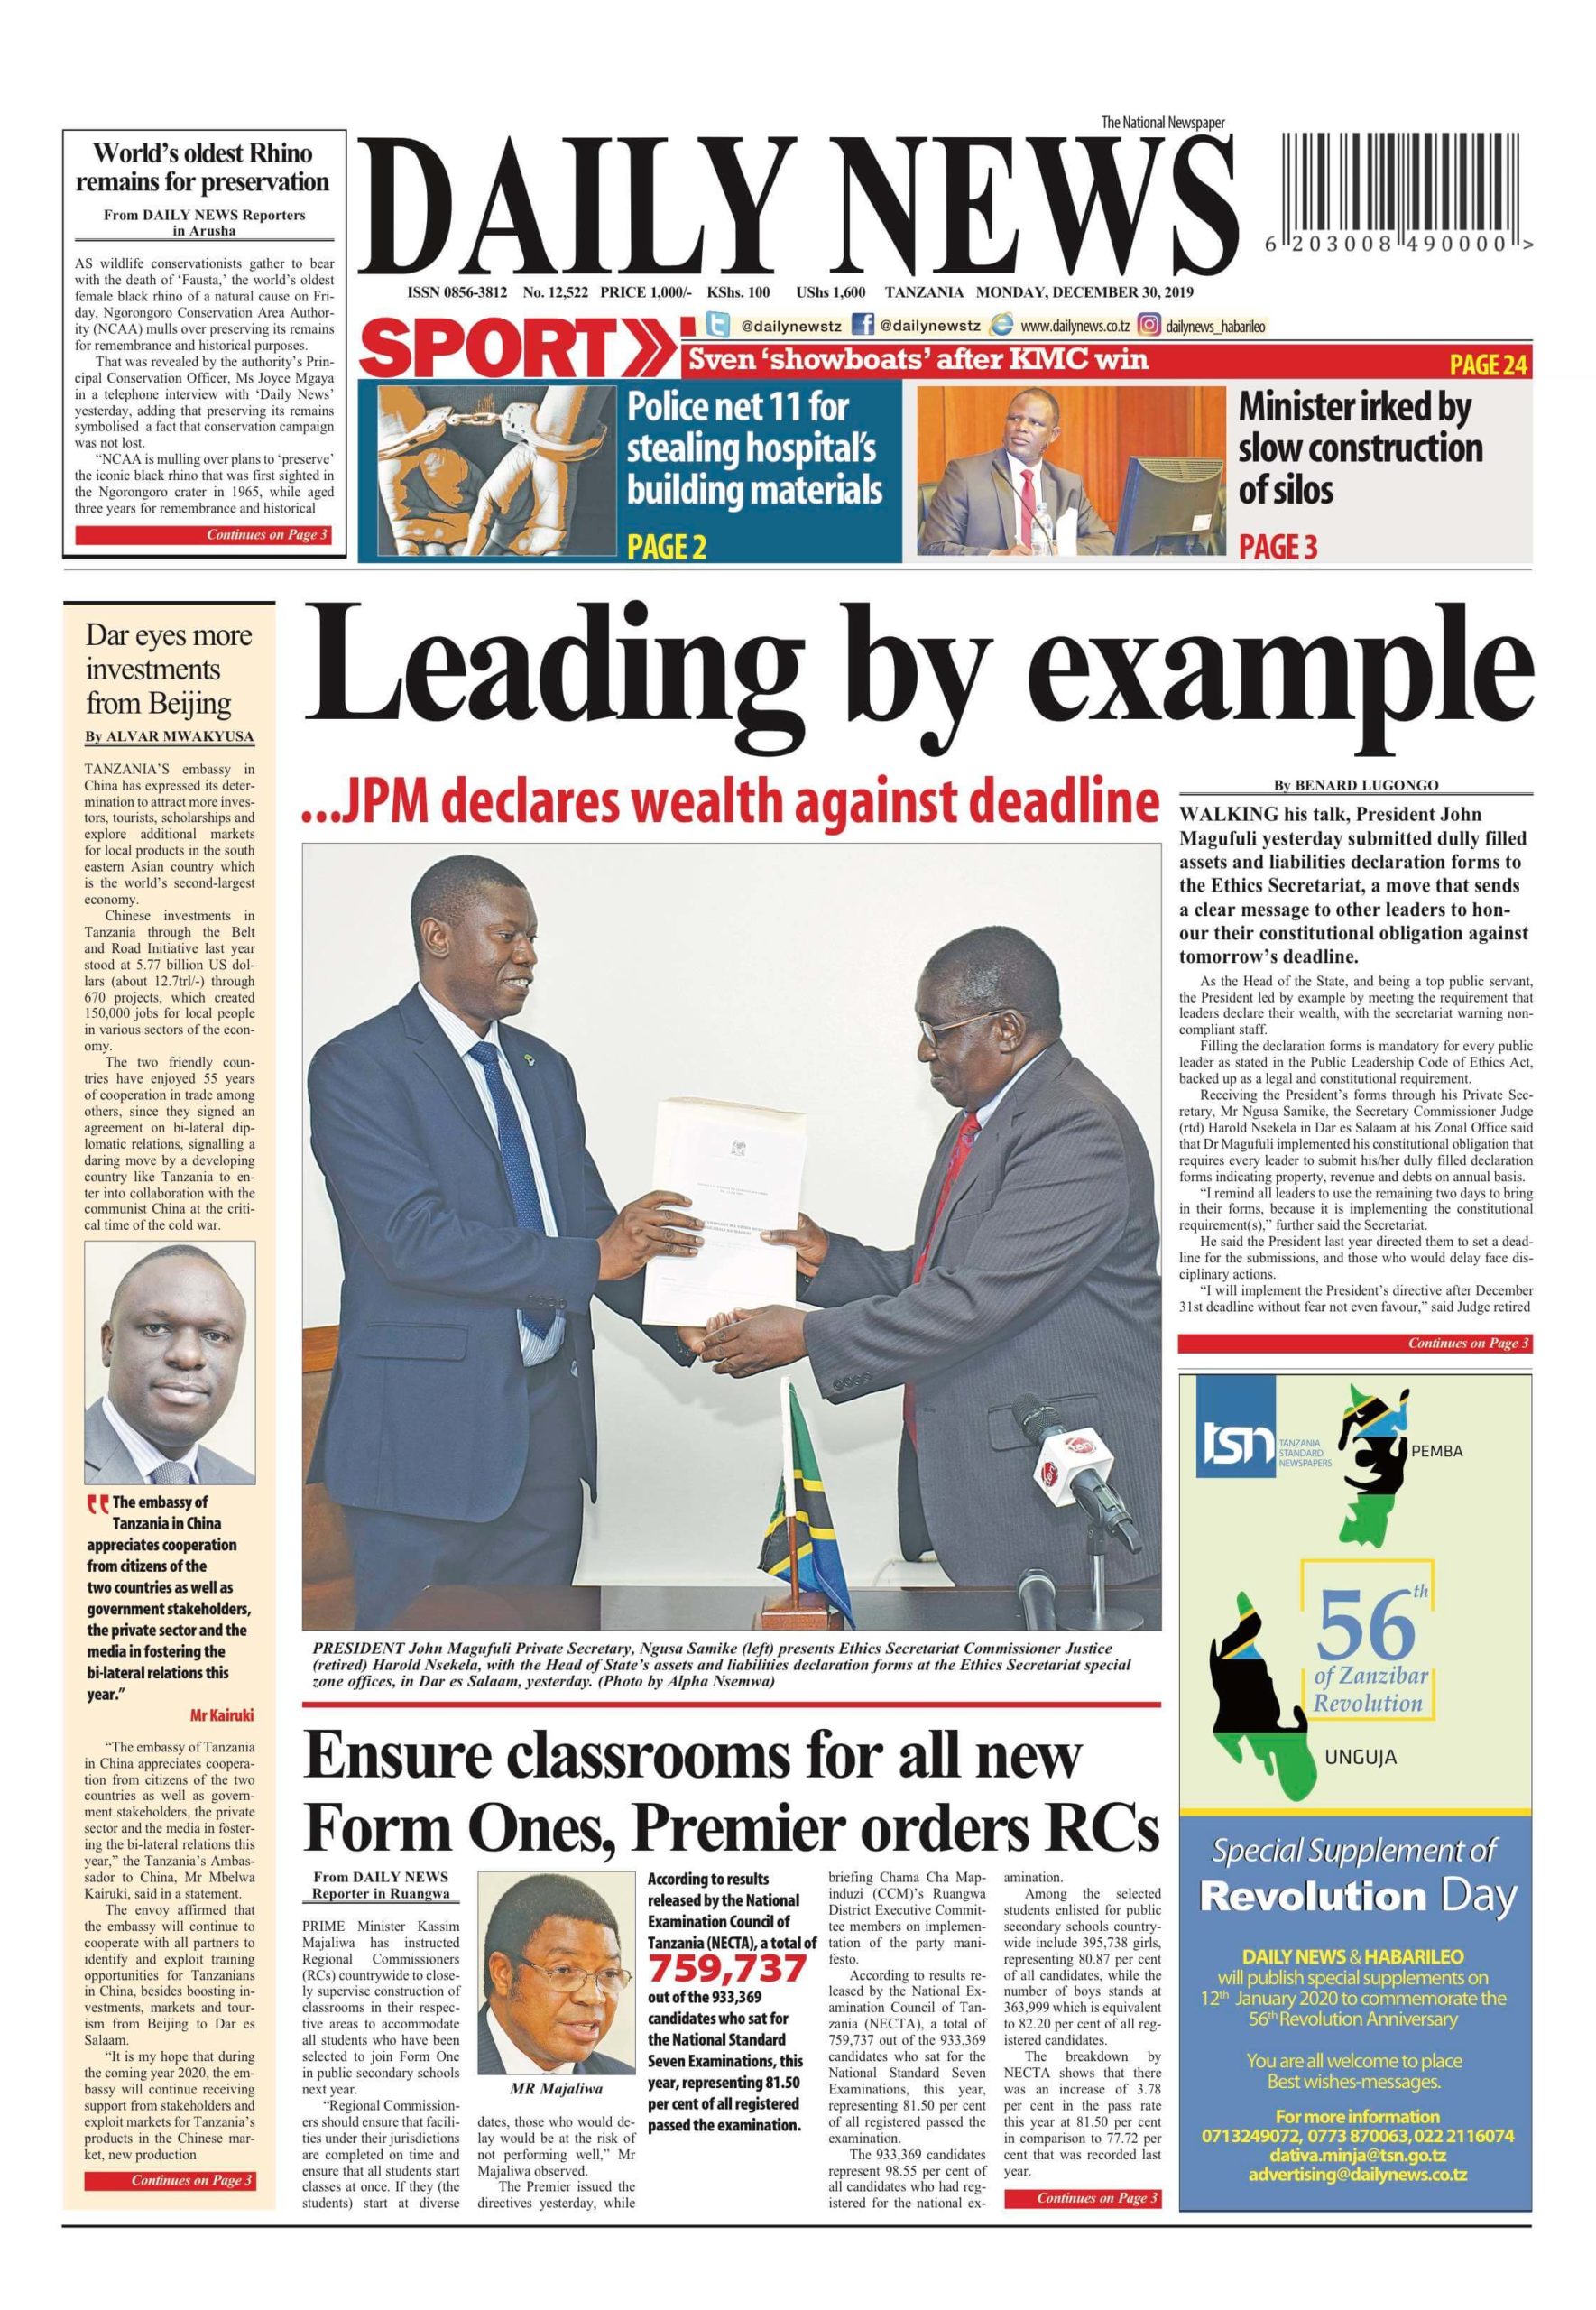 Tanzania newspapers 2 daily news scaled